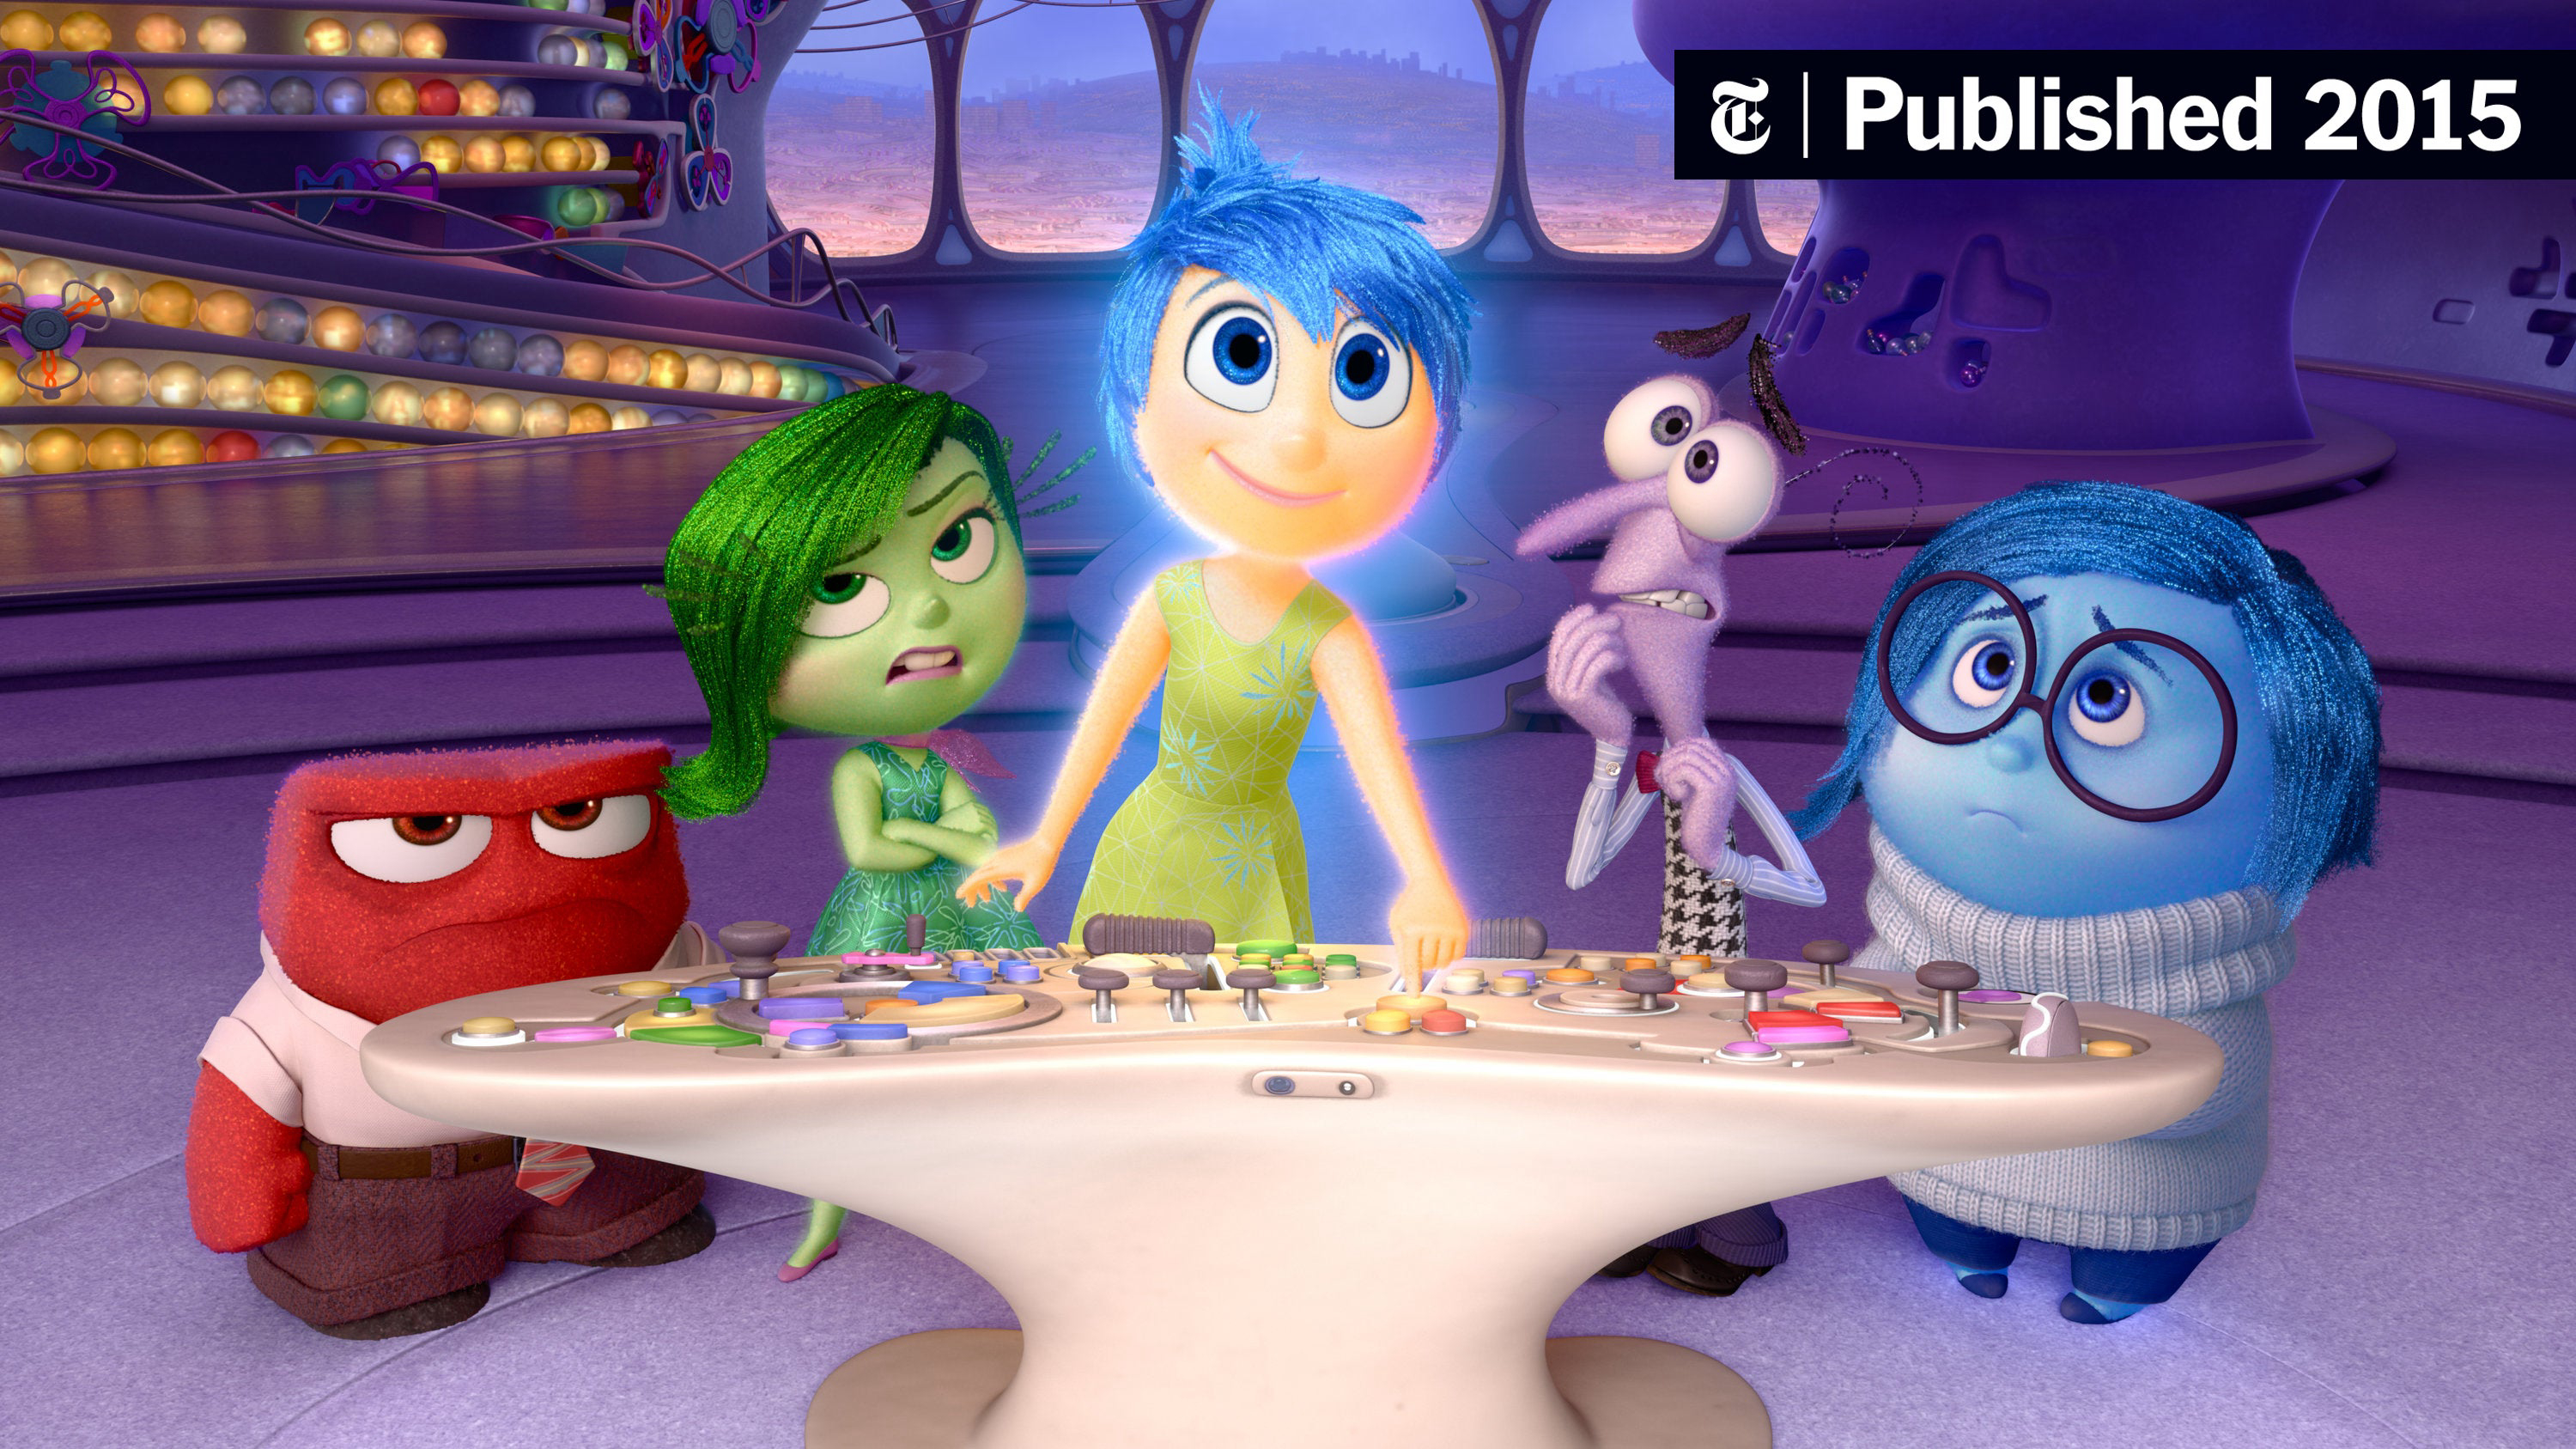 Inside Out / Inside Out (2015)